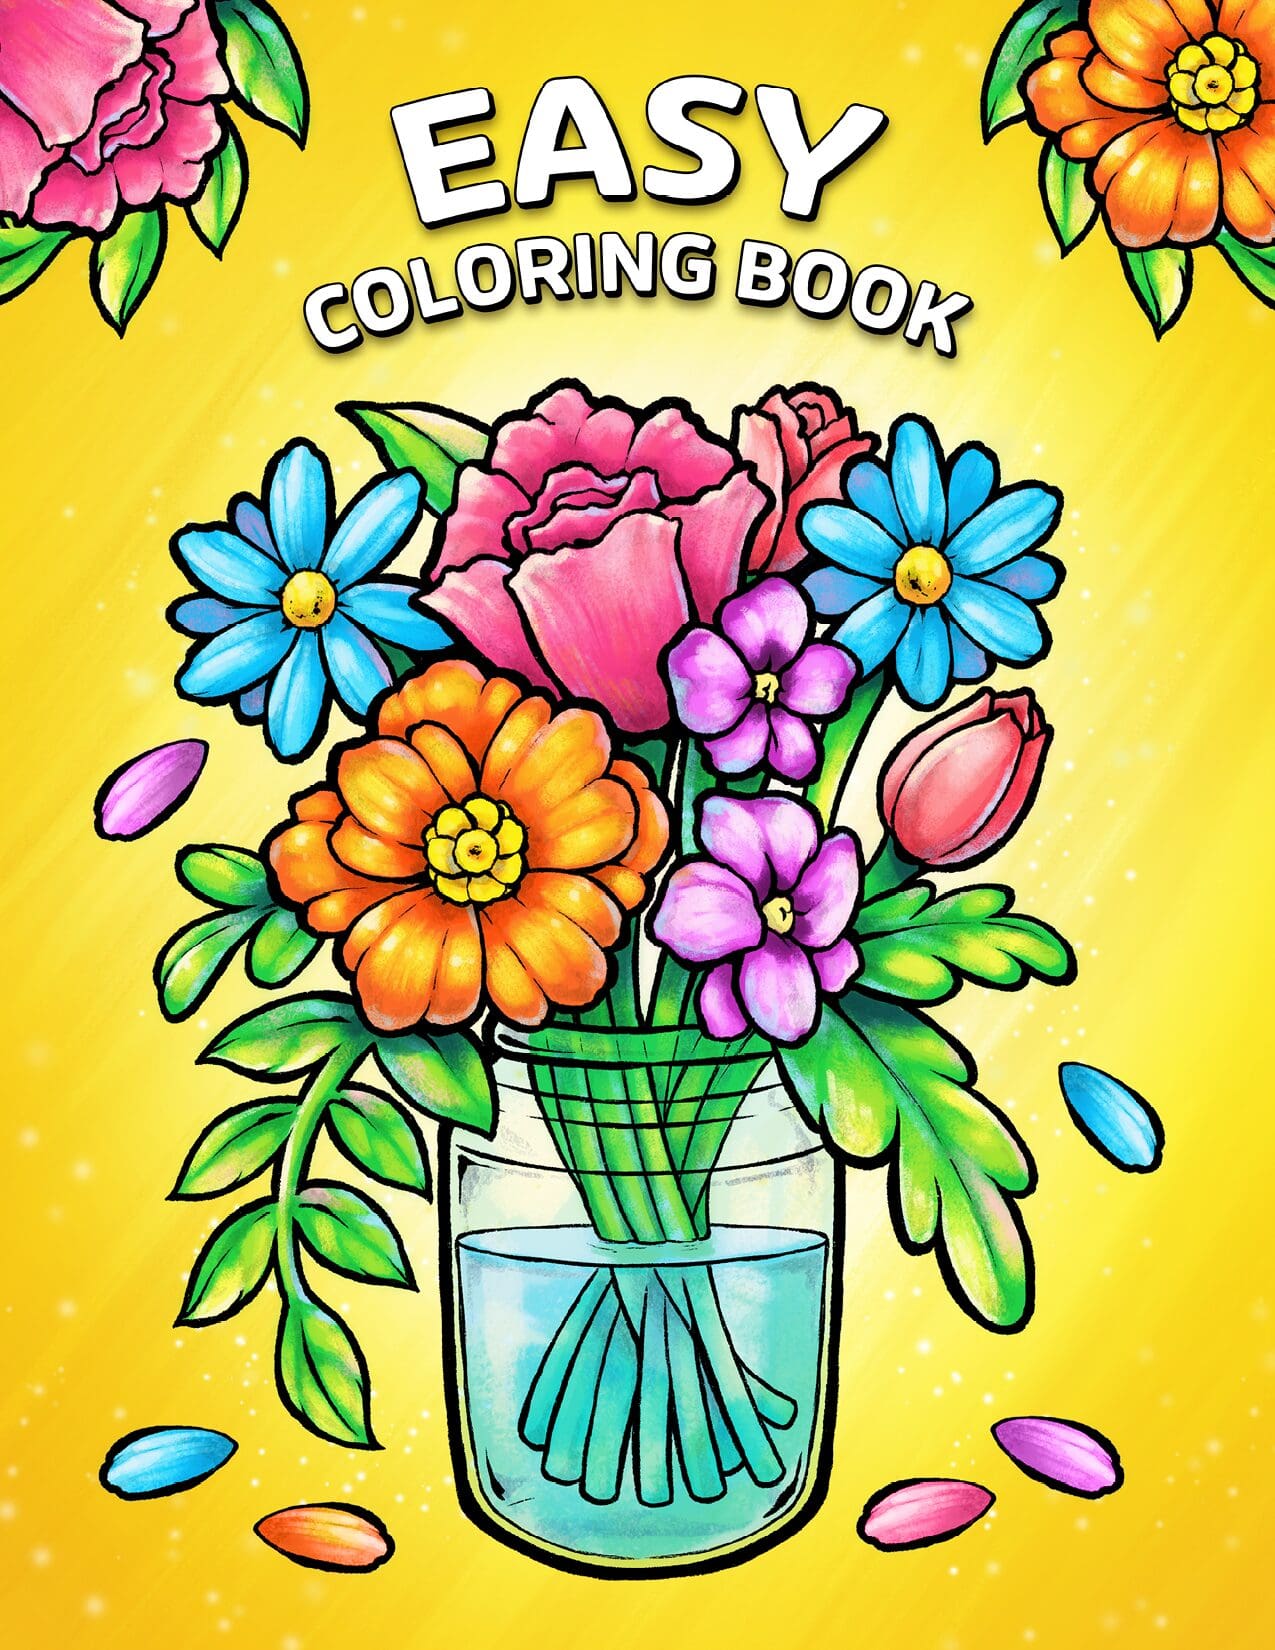 Simple Design Coloring books for adults relaxation: Flower, Floral,  Butterfly and Bird with Simple pattern for beginner (Paperback)